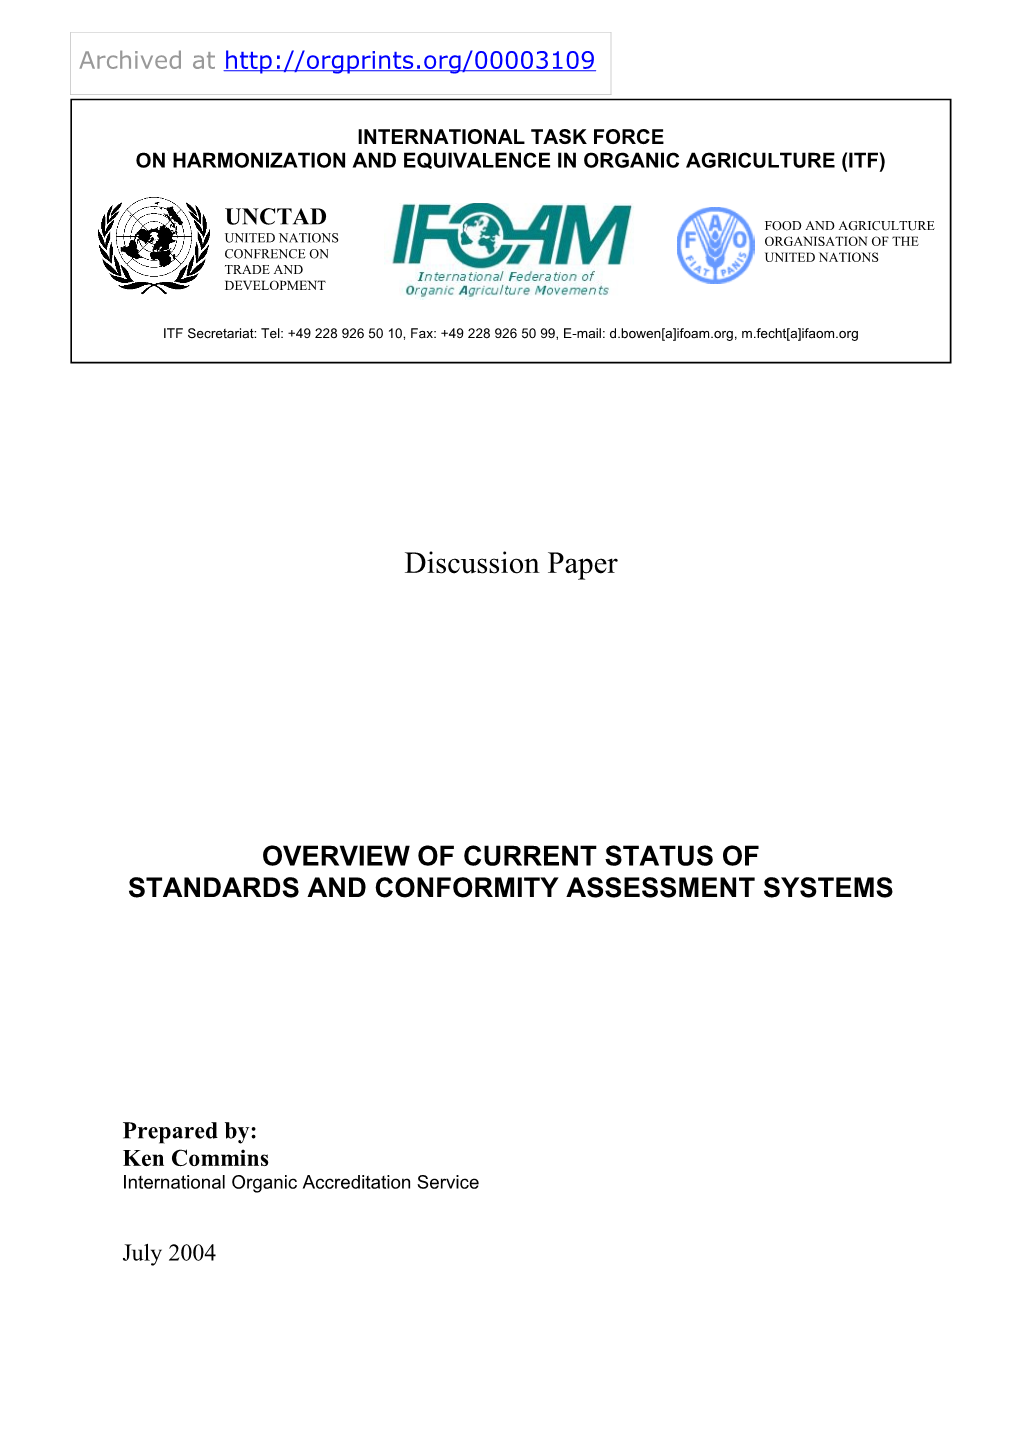 Standards and Conformity Assessment Systems